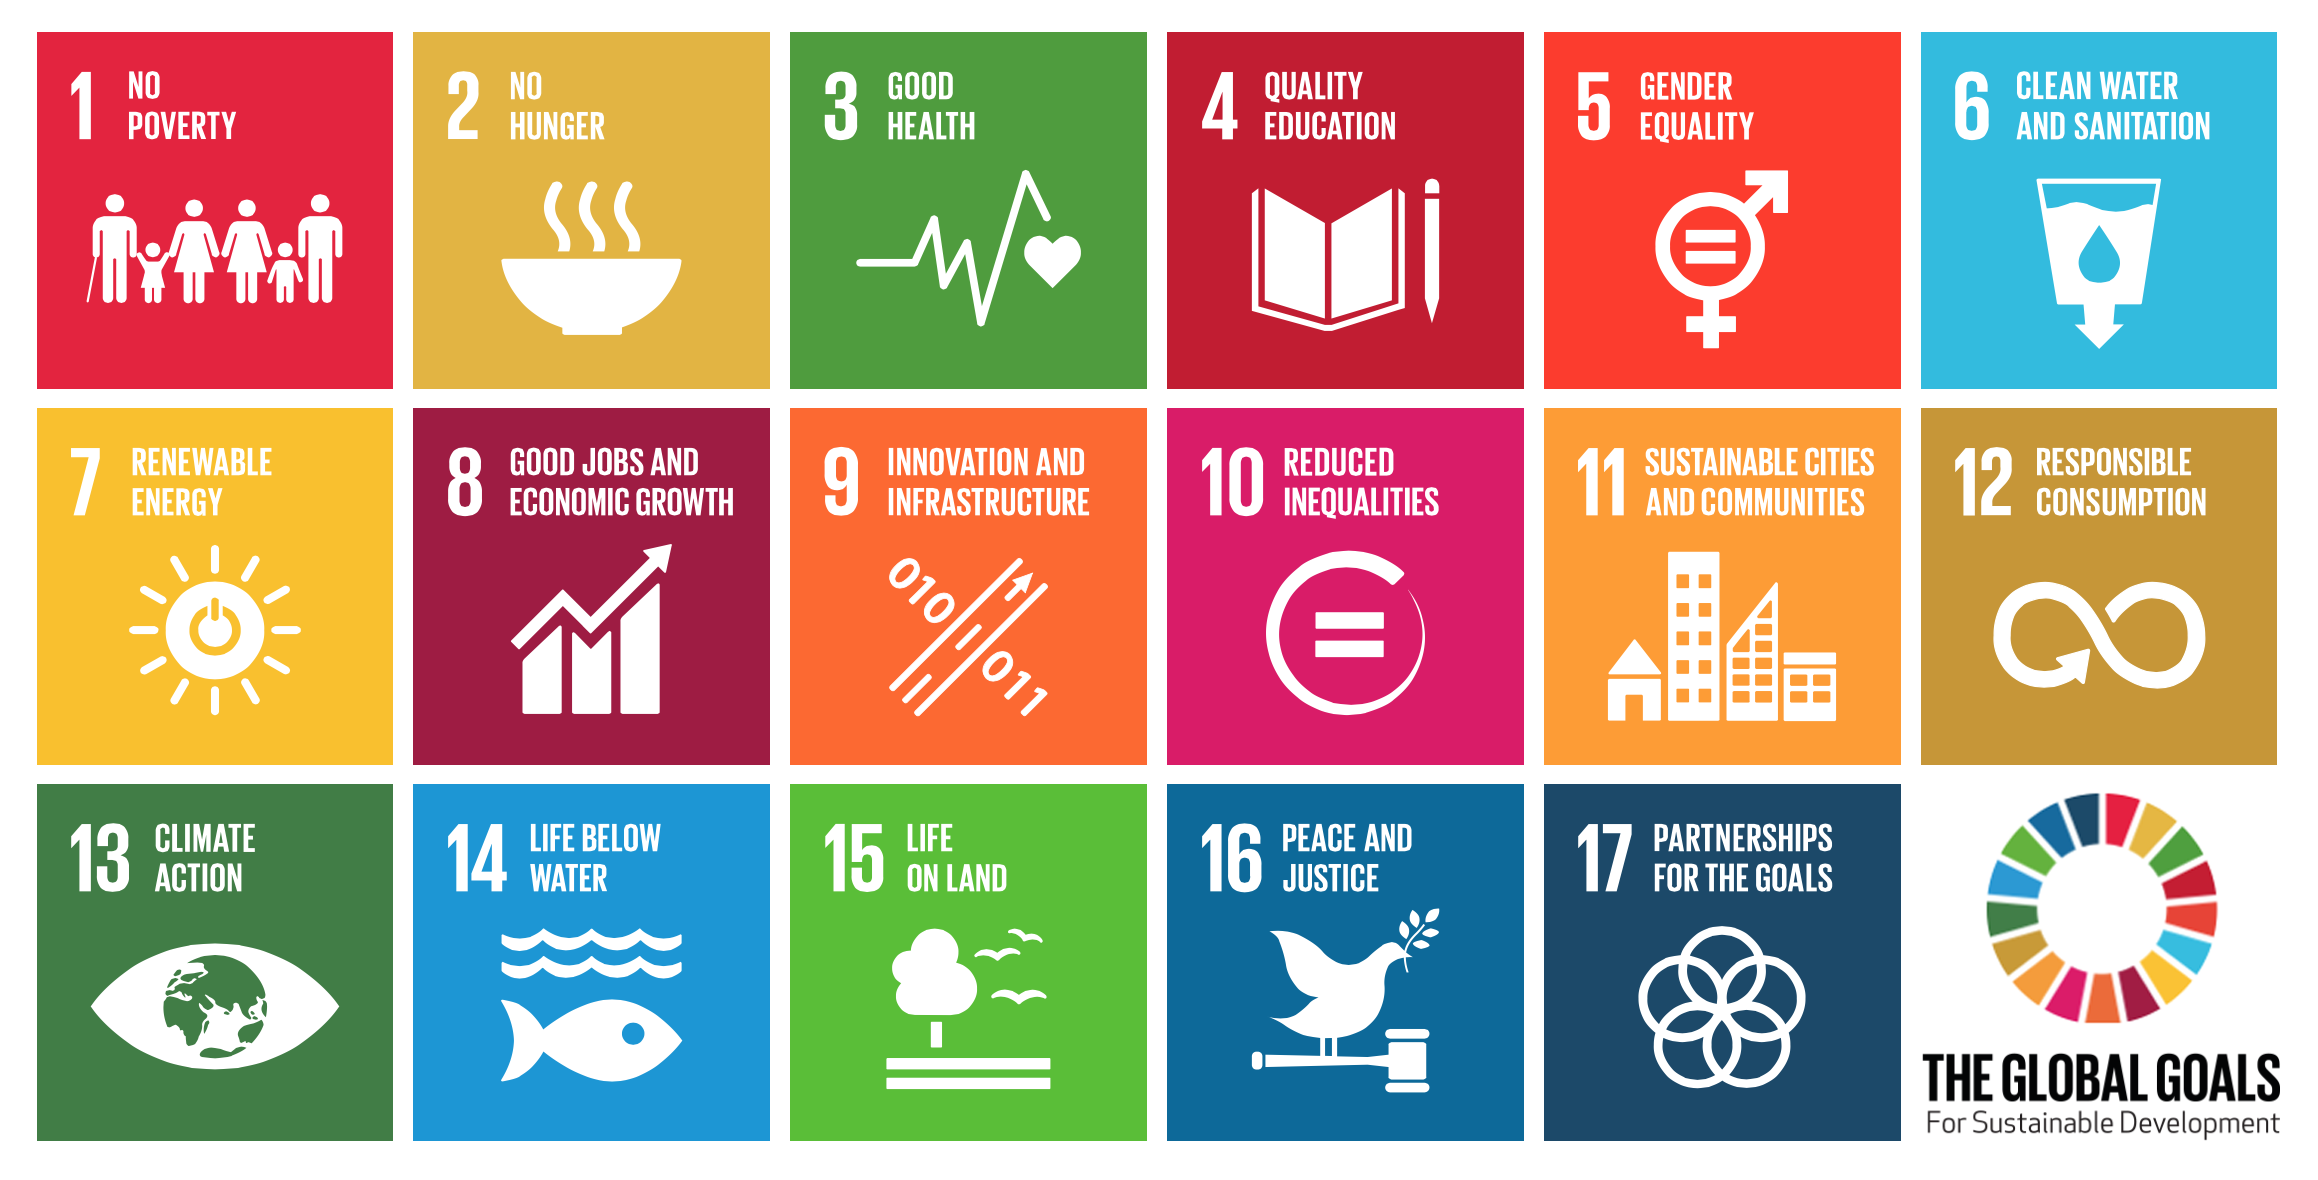 Beyond business as usual: Aligning business strategy and climate action with the SDGs